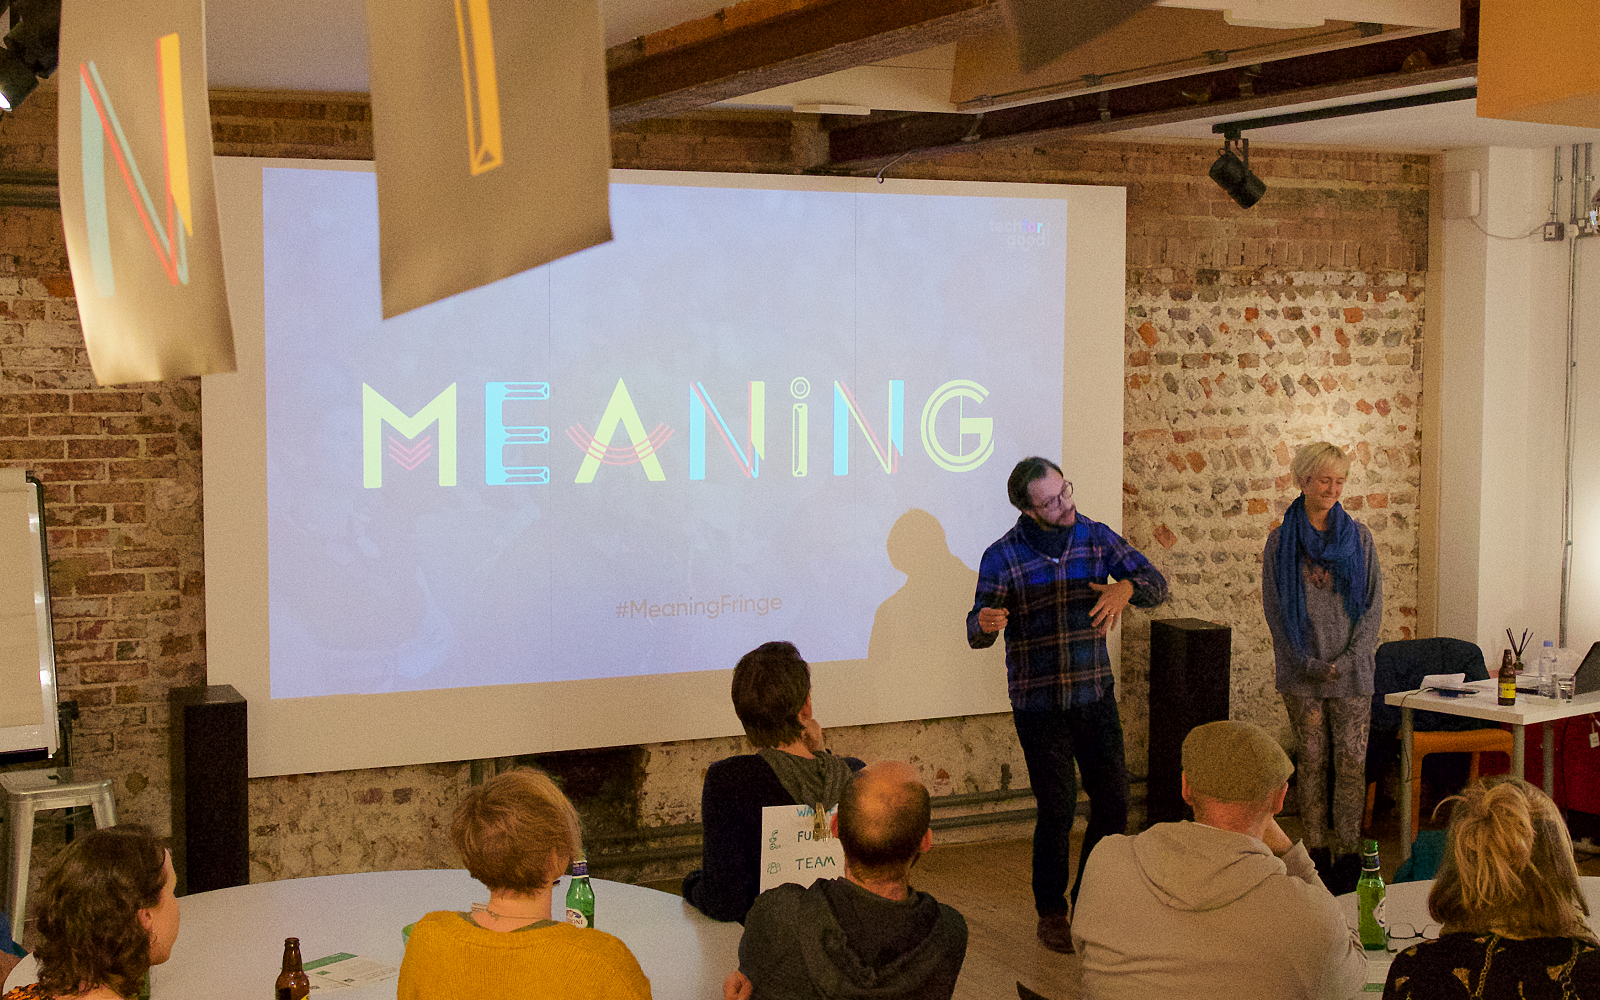 David Scurr presents at the special ‘Meaning Conference’ edition of Tech for Good Brighton.